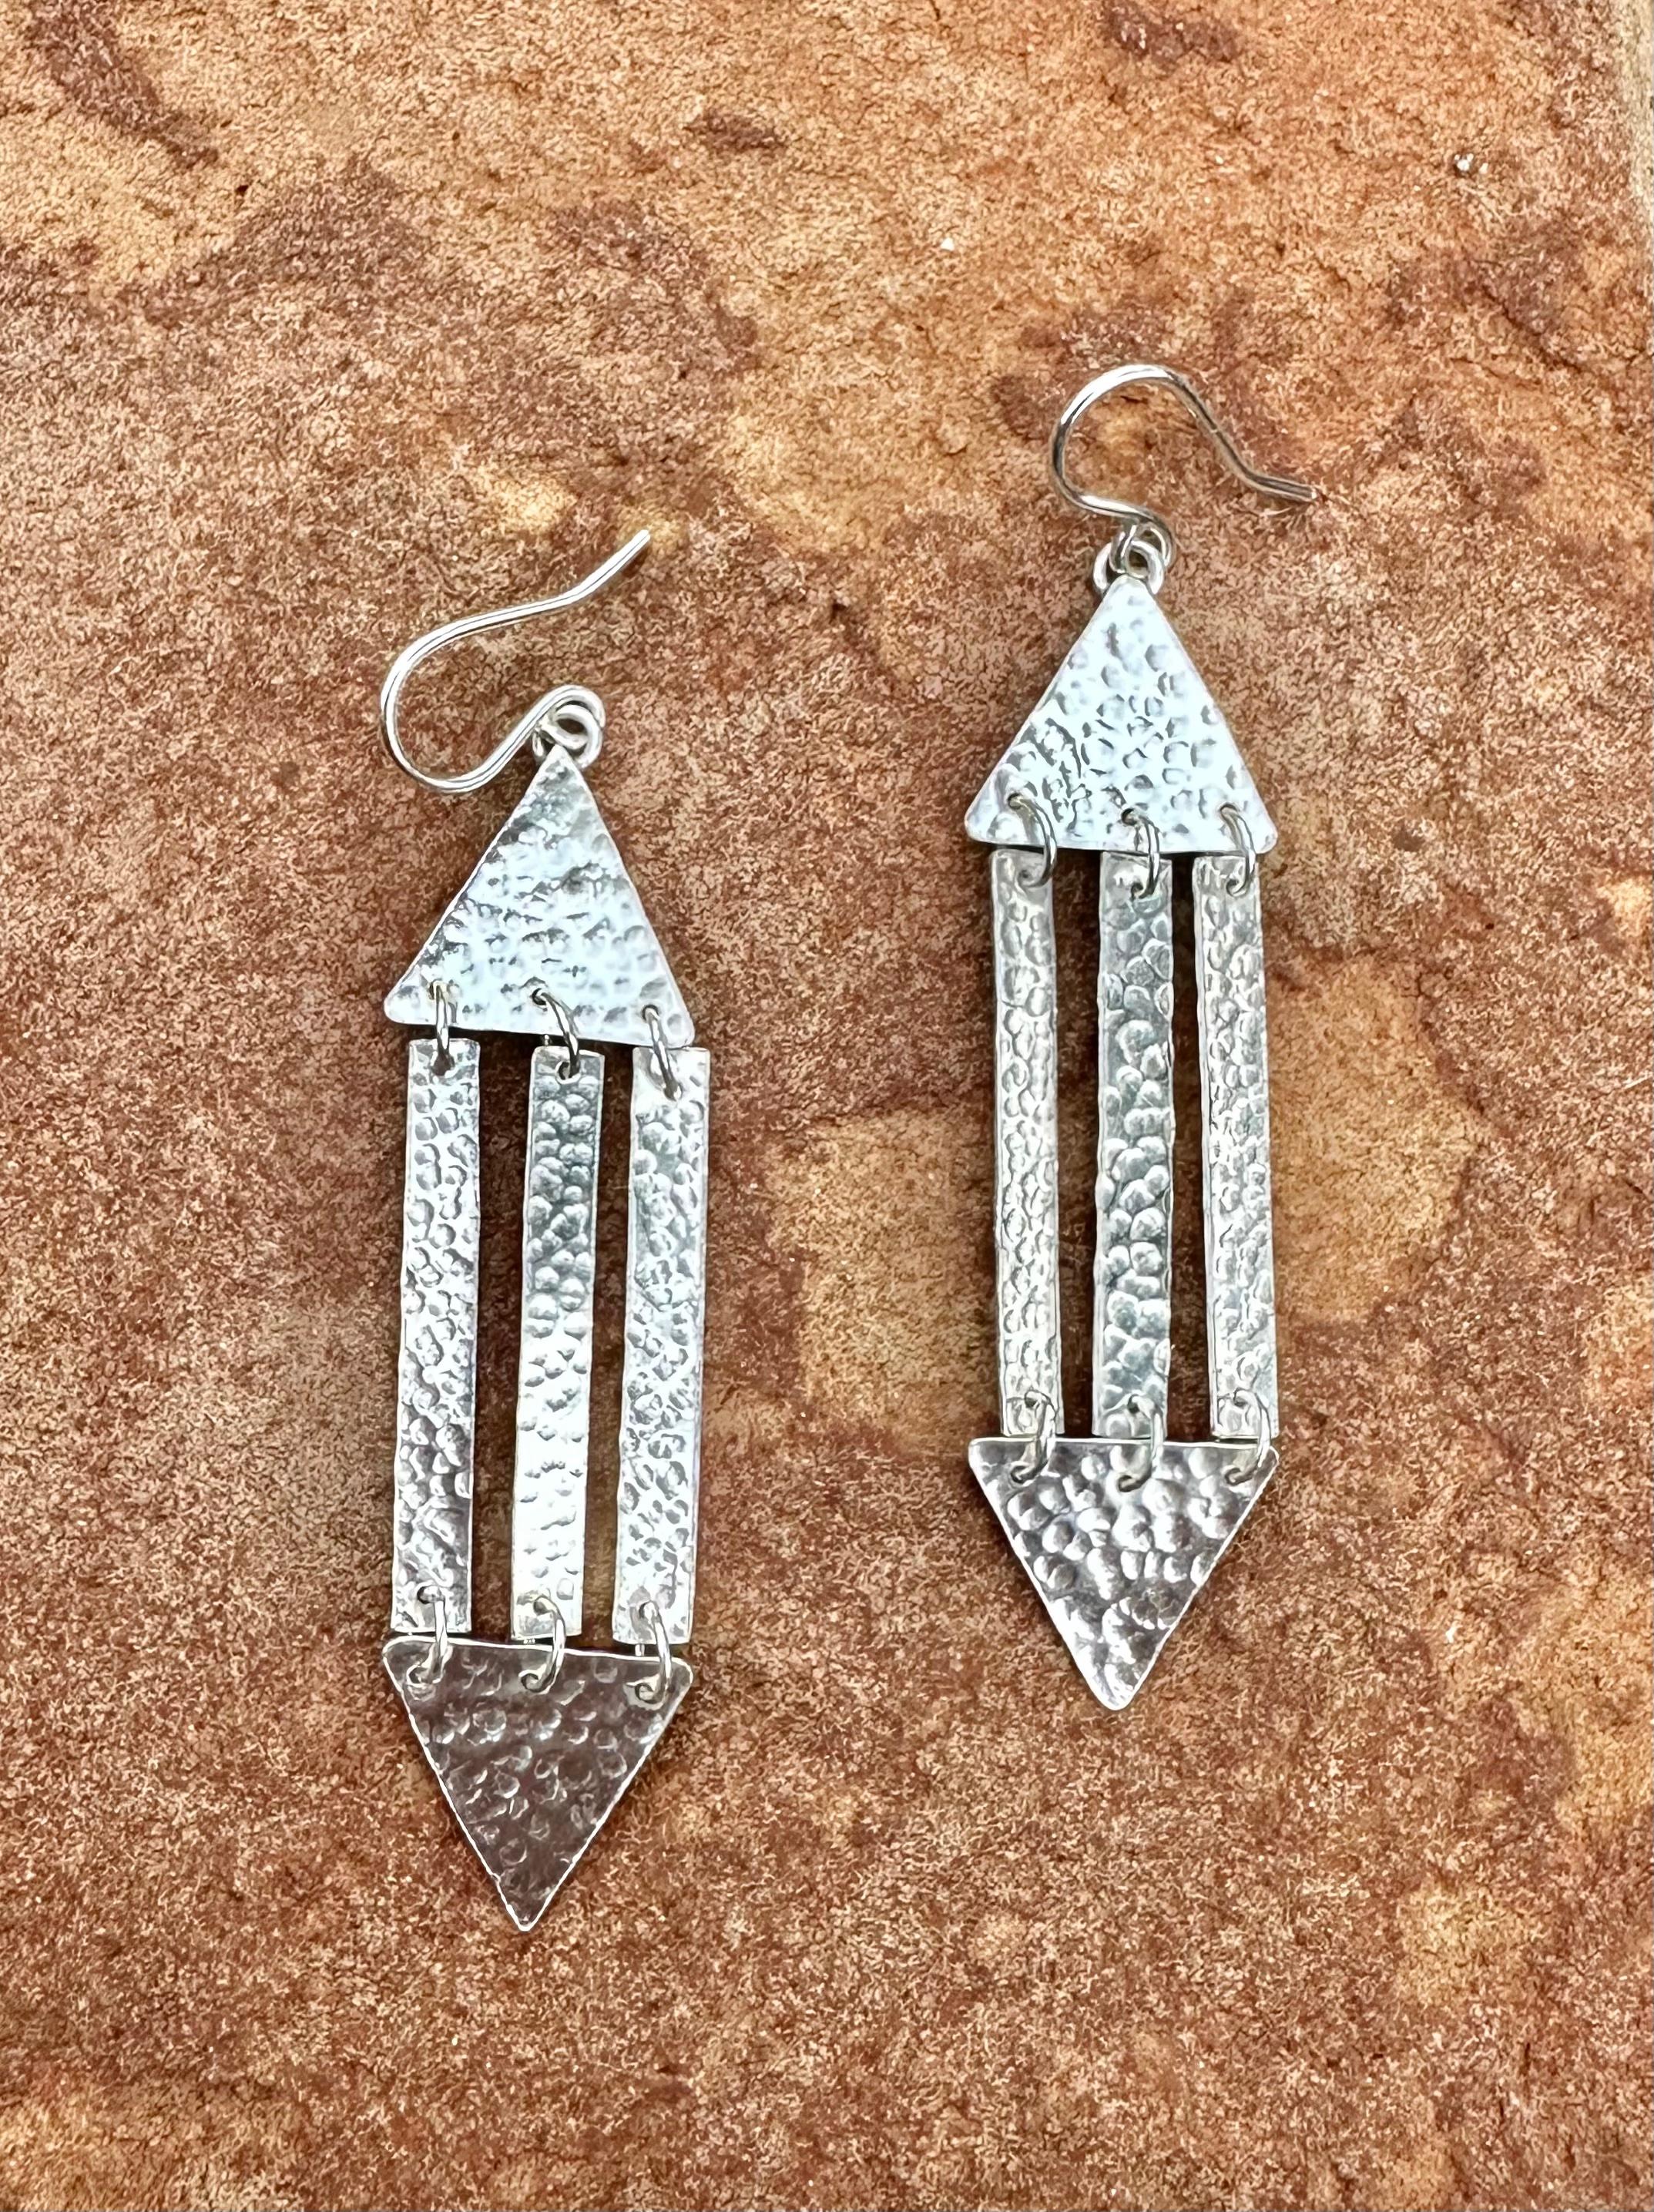 -Available
-Handmade
-Sterling silver
-Stamped with Nebu logo

Introducing our sleek and stylish triangle modern earrings, handcrafted in sterling silver. These earrings are designed with a contemporary flair, featuring a minimalist triangle shape